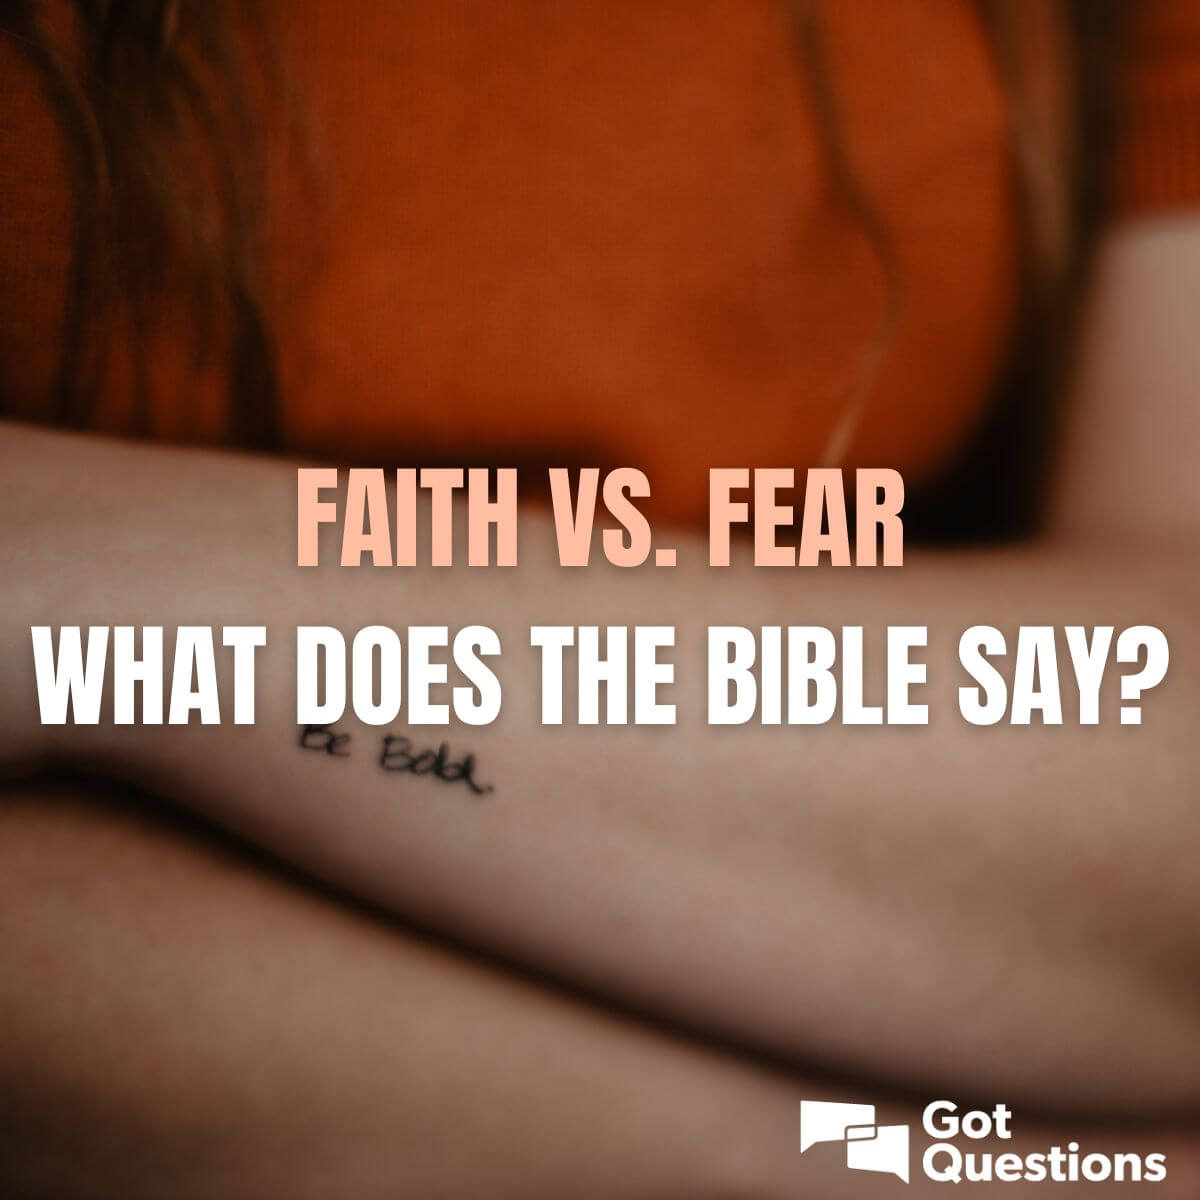 Faith vs. fear - what does the Bible say? | GotQuestions.org